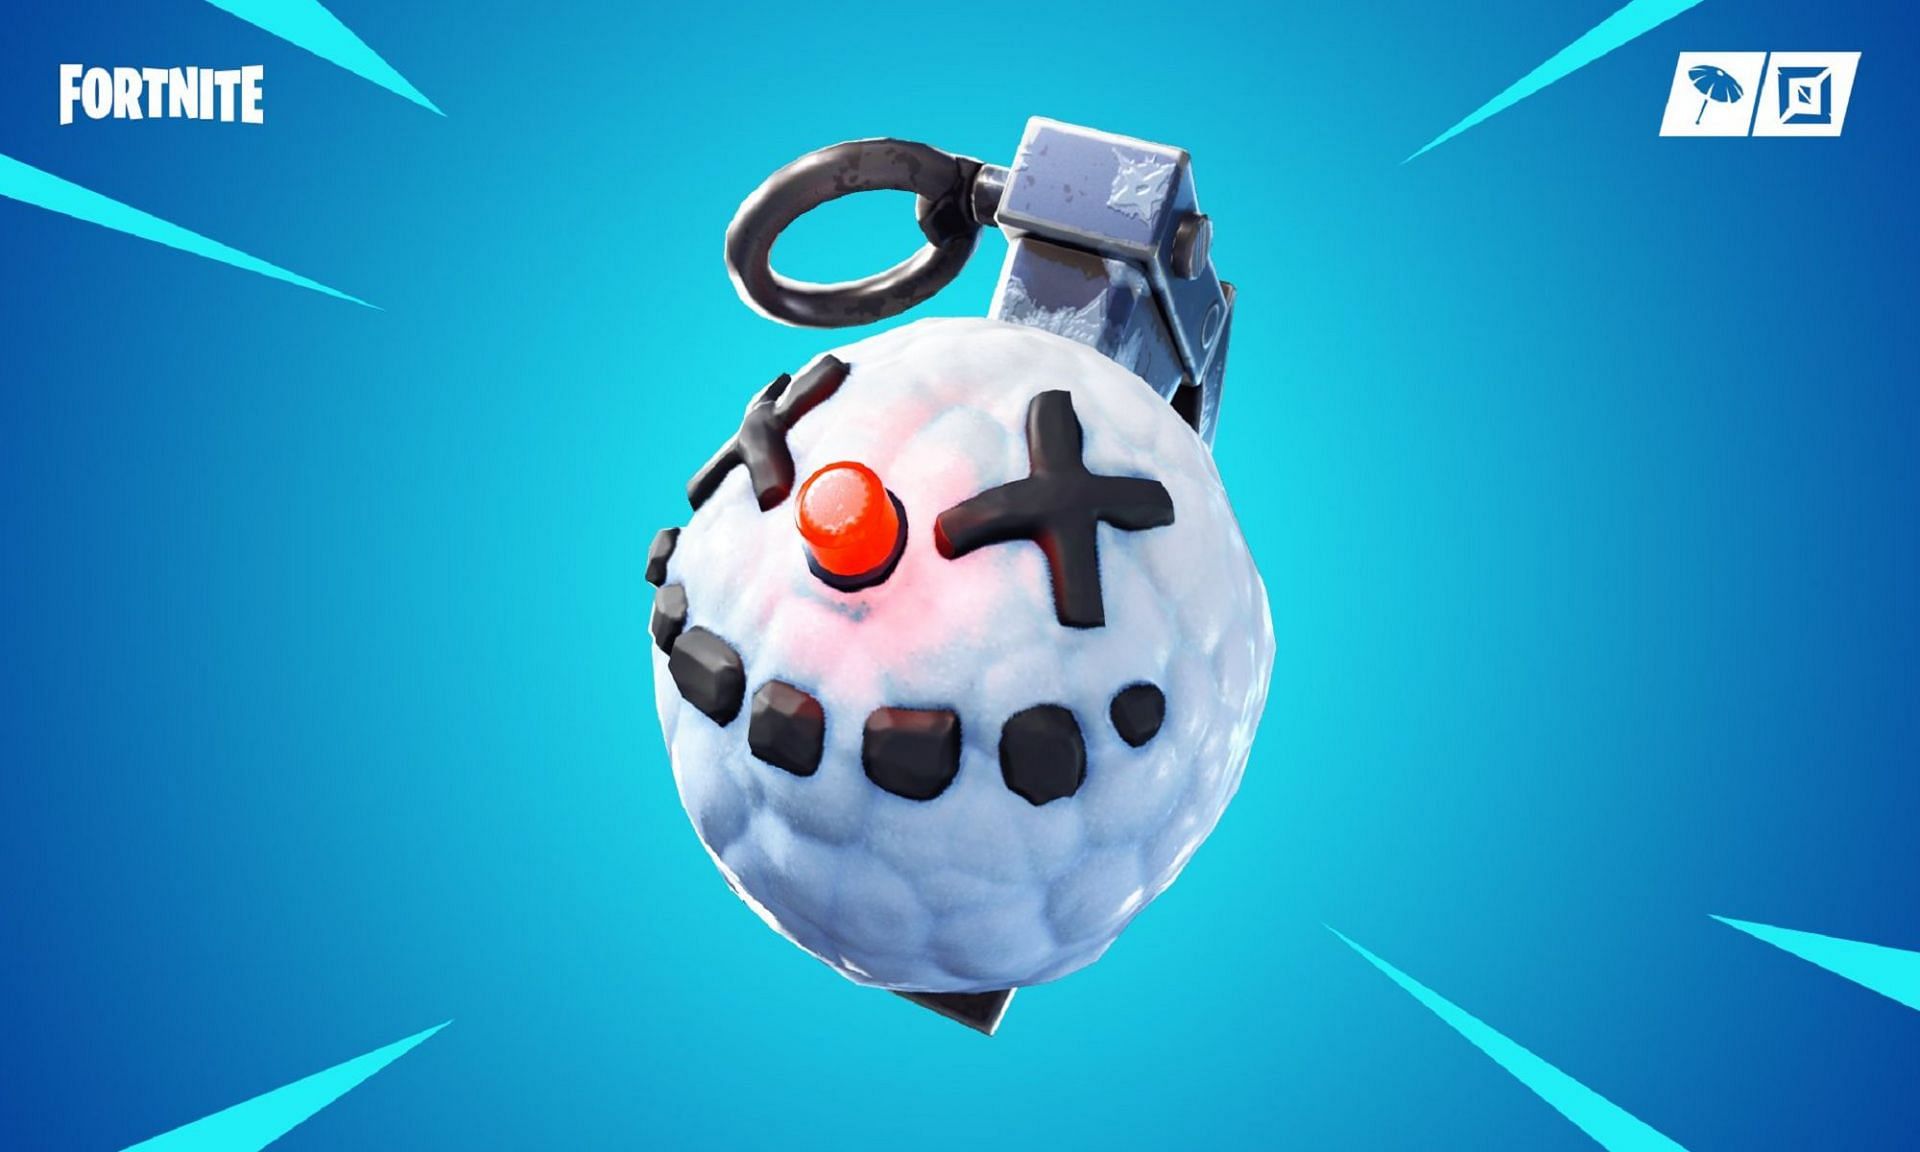 Running with icy feet is not recommended (Image via Epic Games/Fortnite)